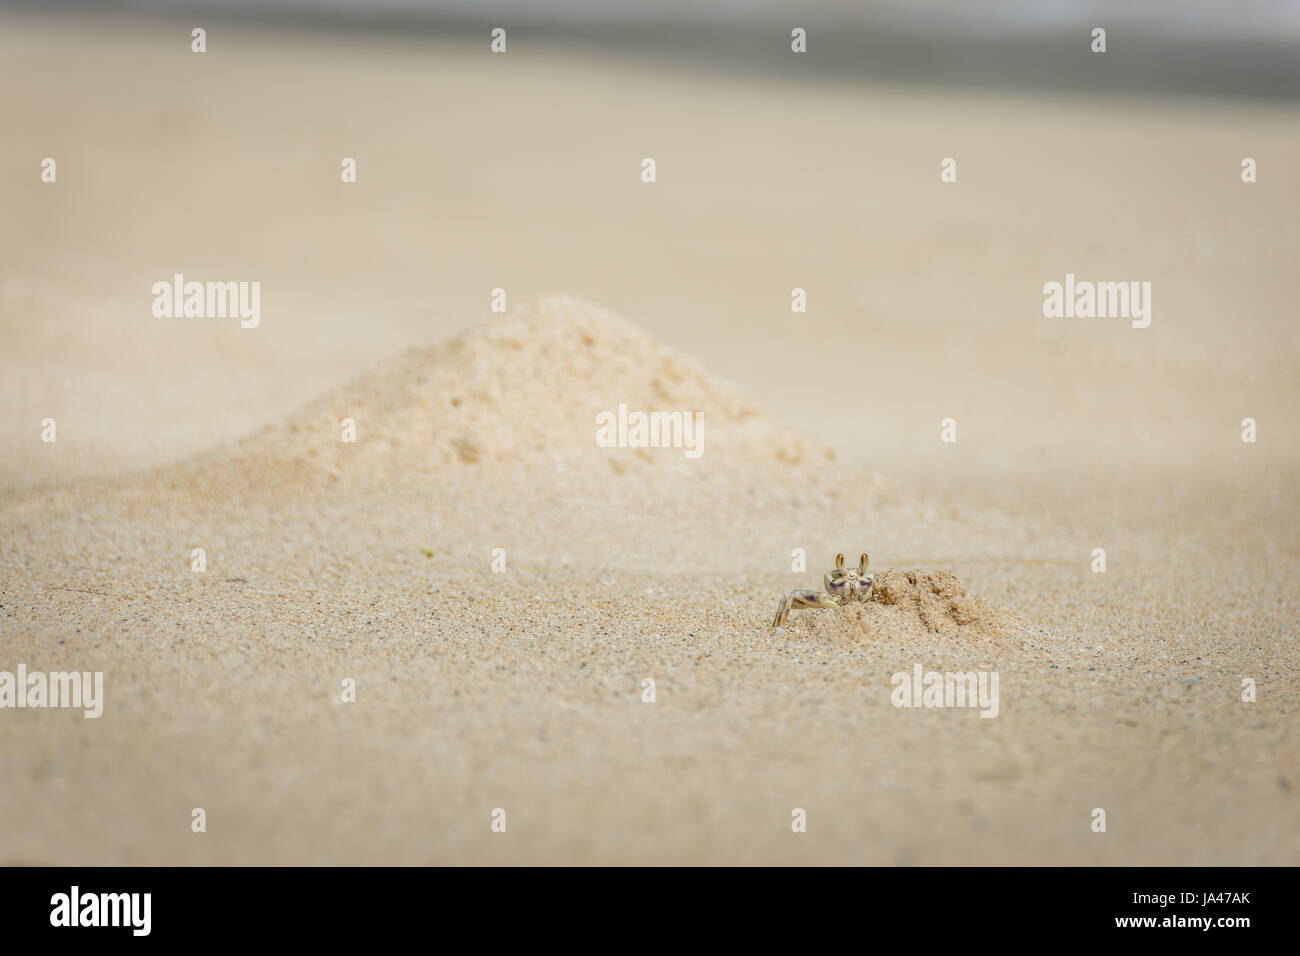 In front of another crab's large burrow, a tiny Ghost Crab starts its own burrow in the white sand of Waimanalo Beach on the island of Oahu, Hawaii. Stock Photo